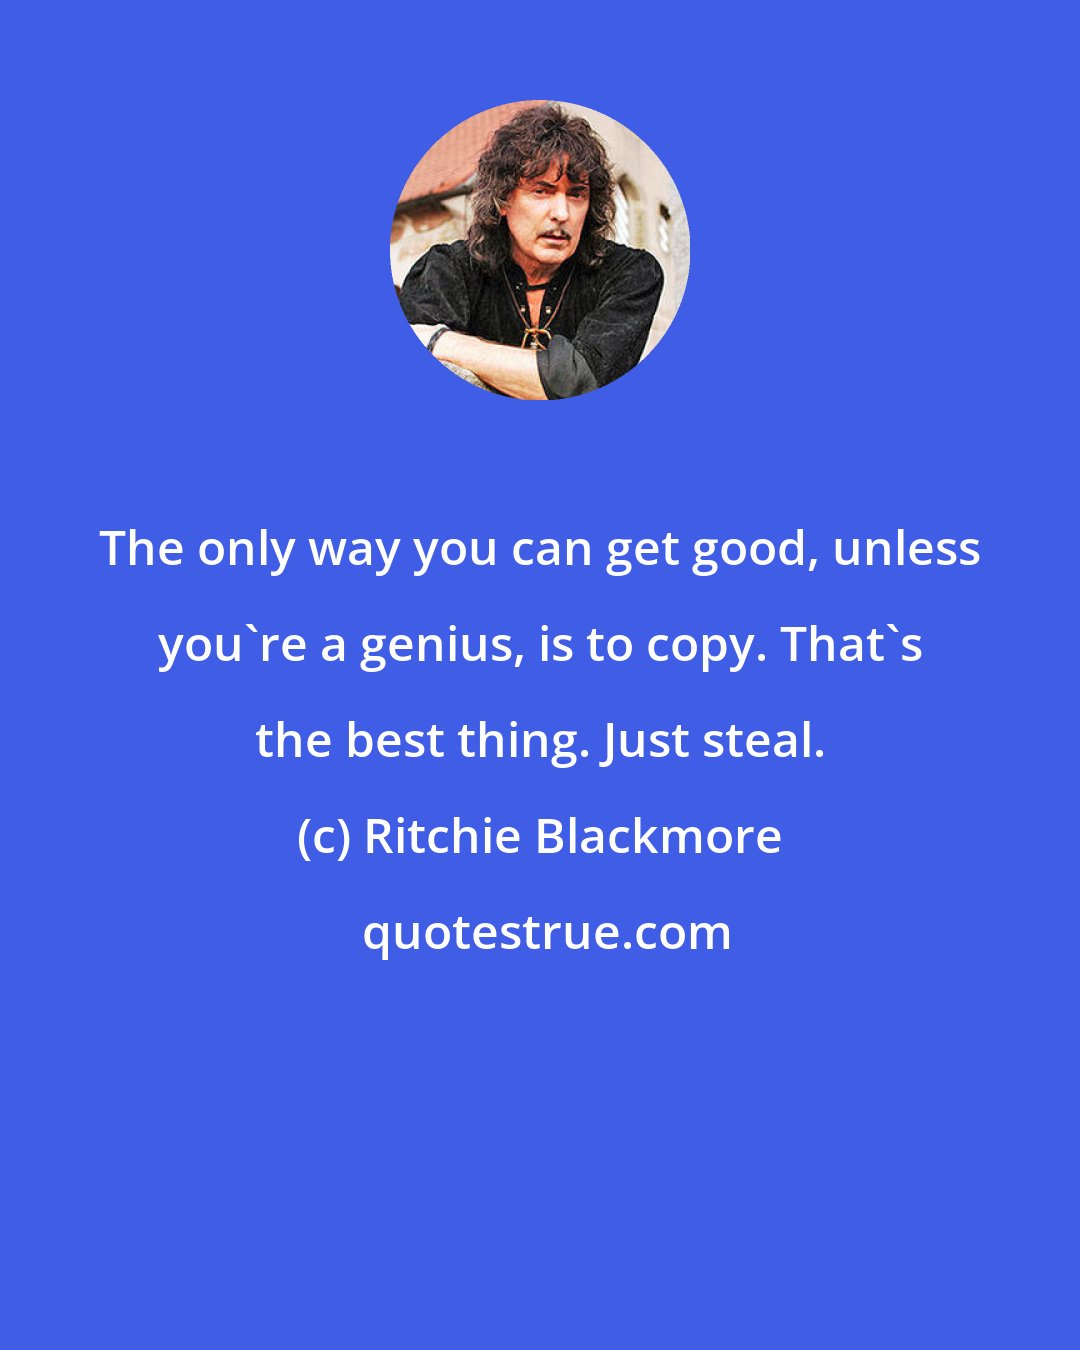 Ritchie Blackmore: The only way you can get good, unless you're a genius, is to copy. That's the best thing. Just steal.